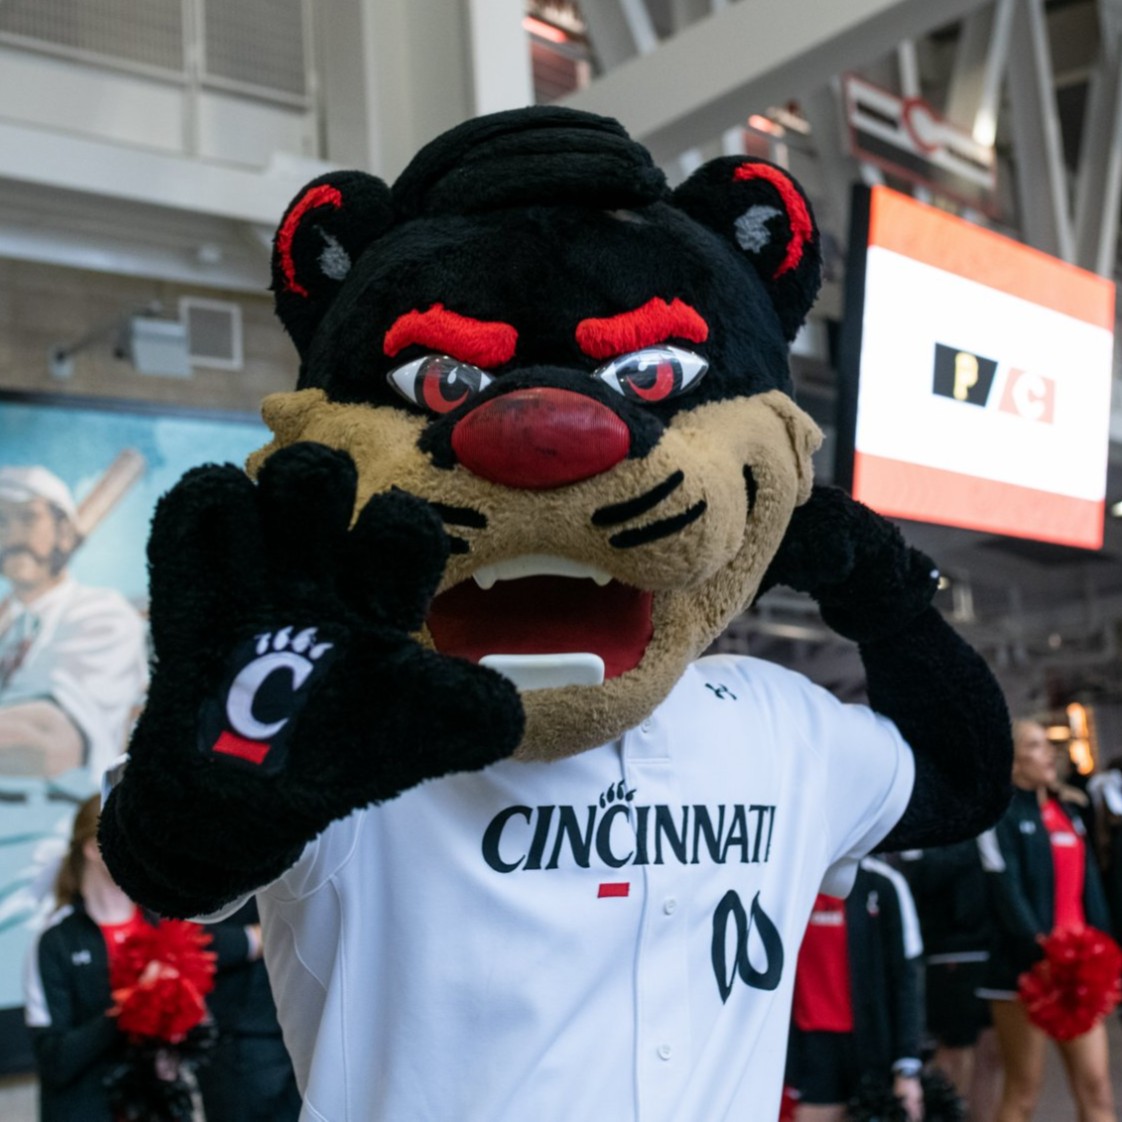 Bearcats at the Ballpark is THIS Saturday! Have you gotten your tickets yet?⚾🚩 Tickets: alumni.uc.edu/reds